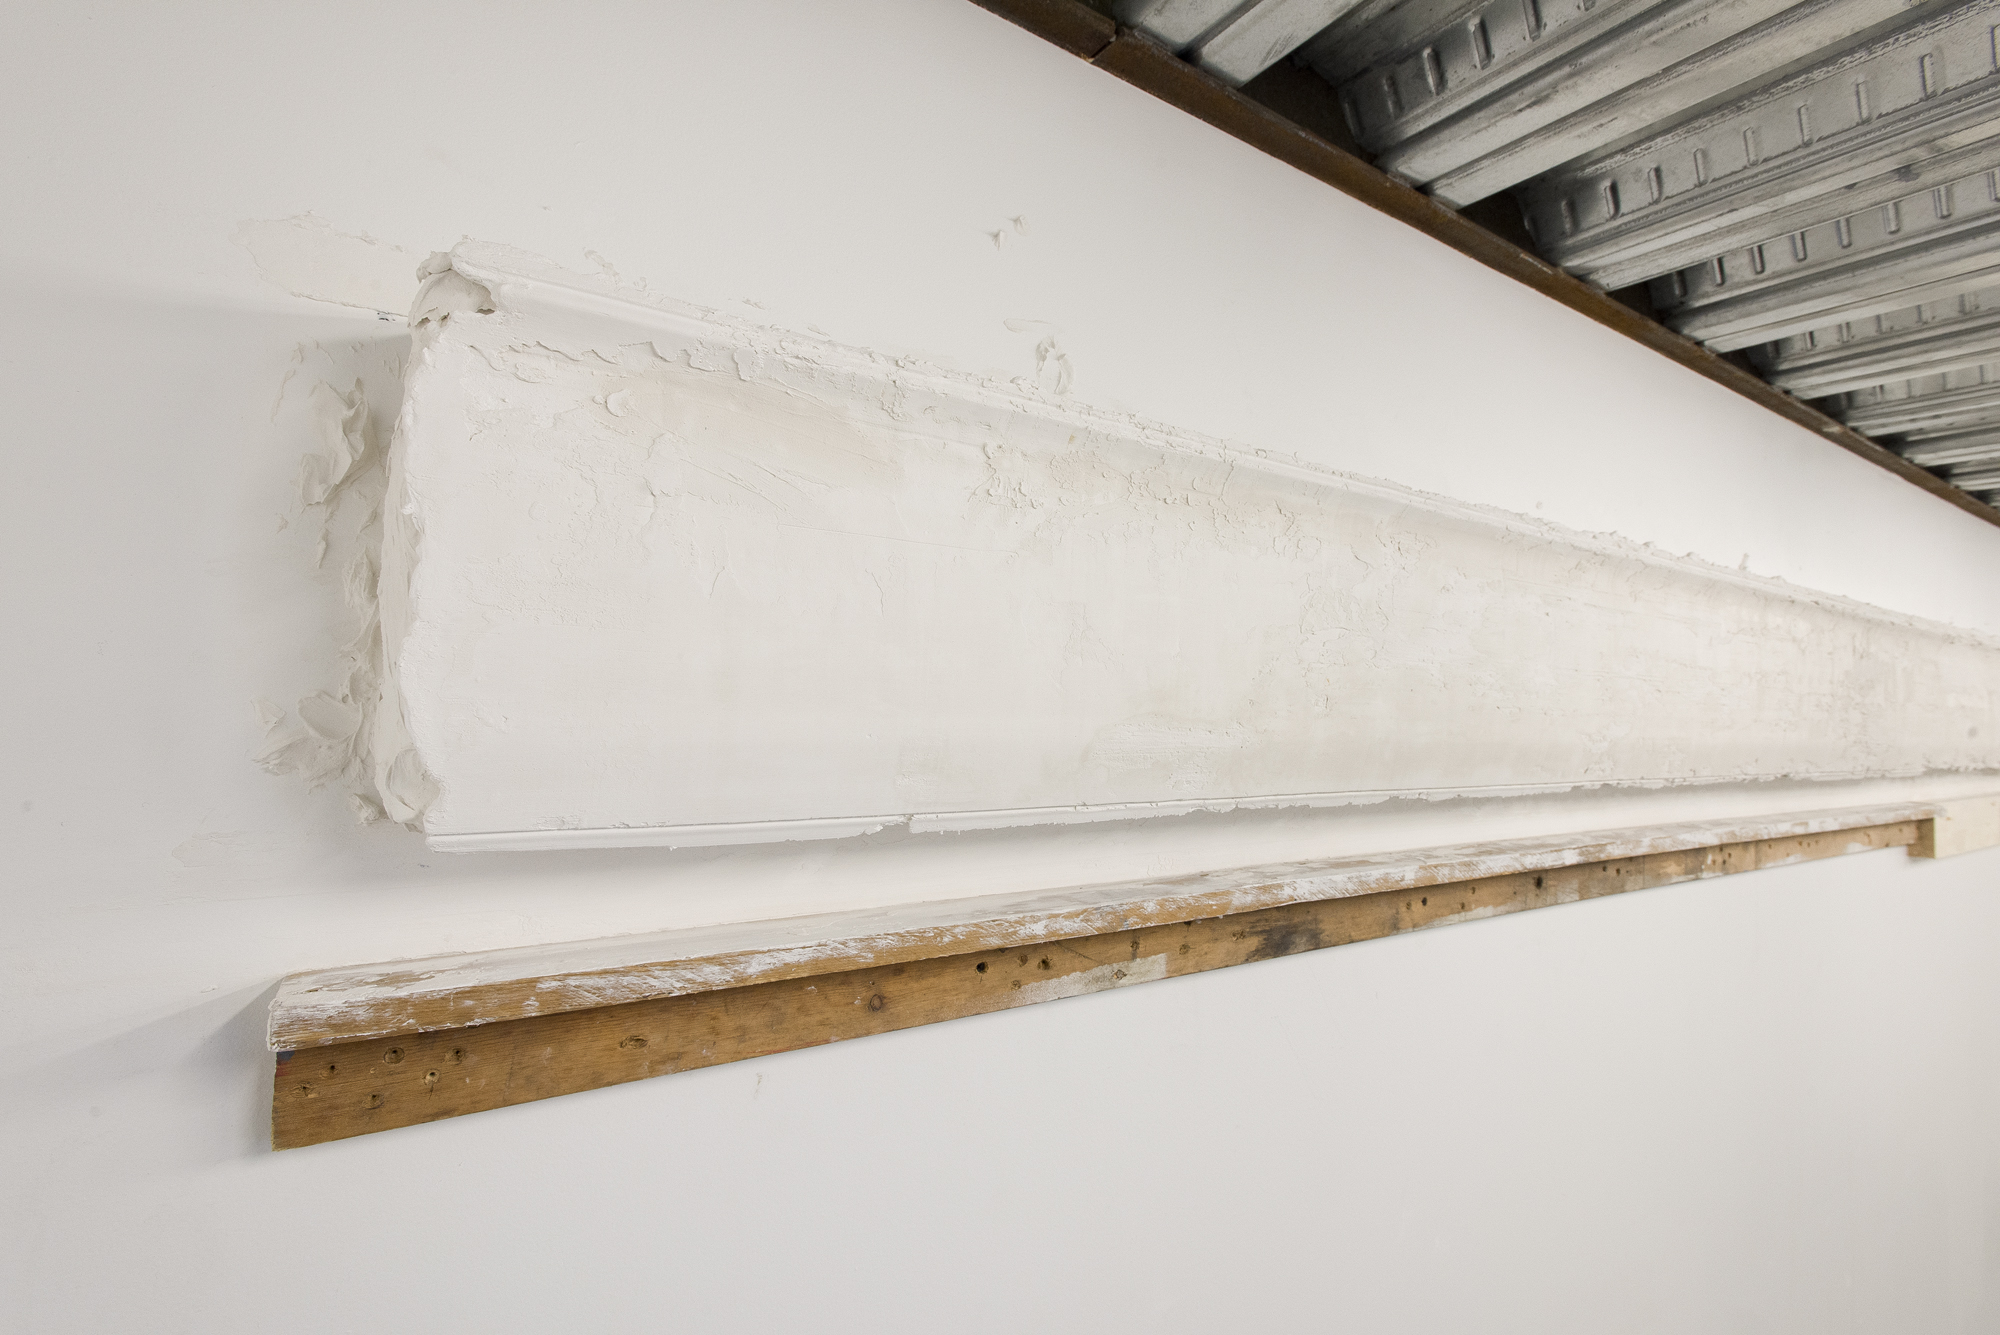  Jorge Satorre,  Sometimes I use images in my work that might be embarrassing to me, my family or my dealers (cornice) , 2019. Plaster, dimensions variable. Courtesy of the artist and Labor, Mexico; Photo: Preston/Kalogiros; Courtesy of The 500 Capp 